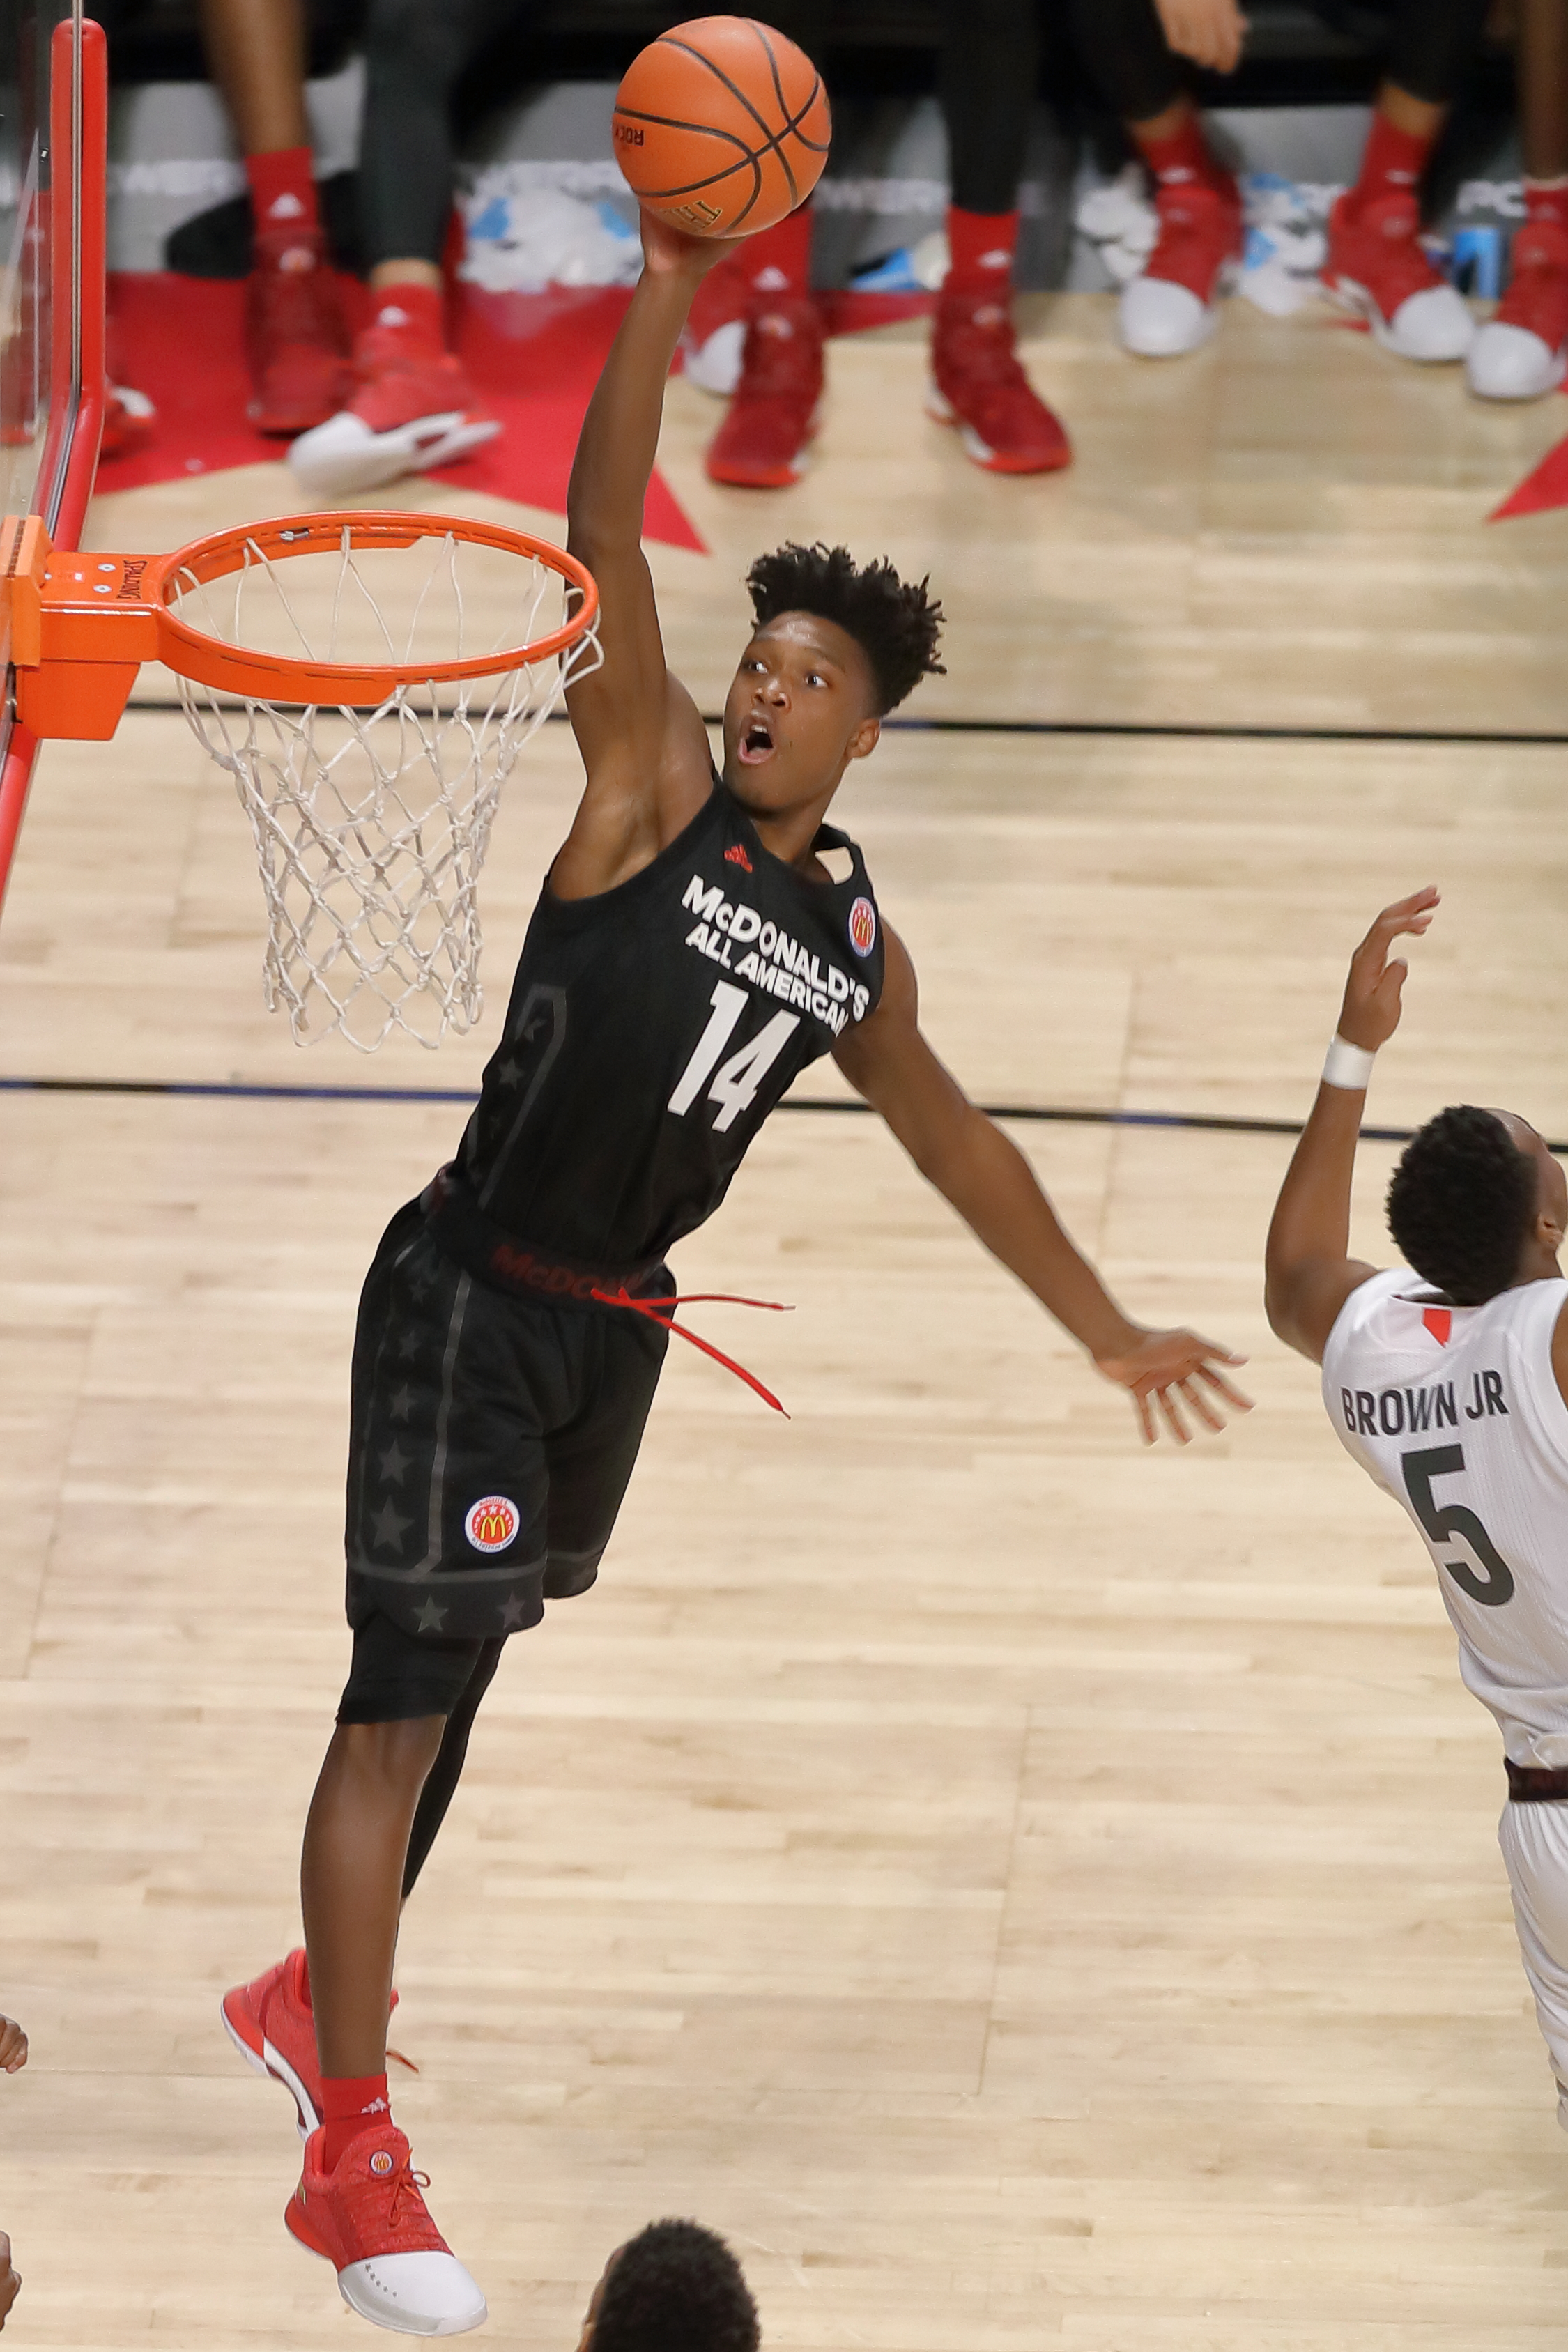 The Miami Hurricane's Lonnie Walker dunking in the McDonald's All American Game